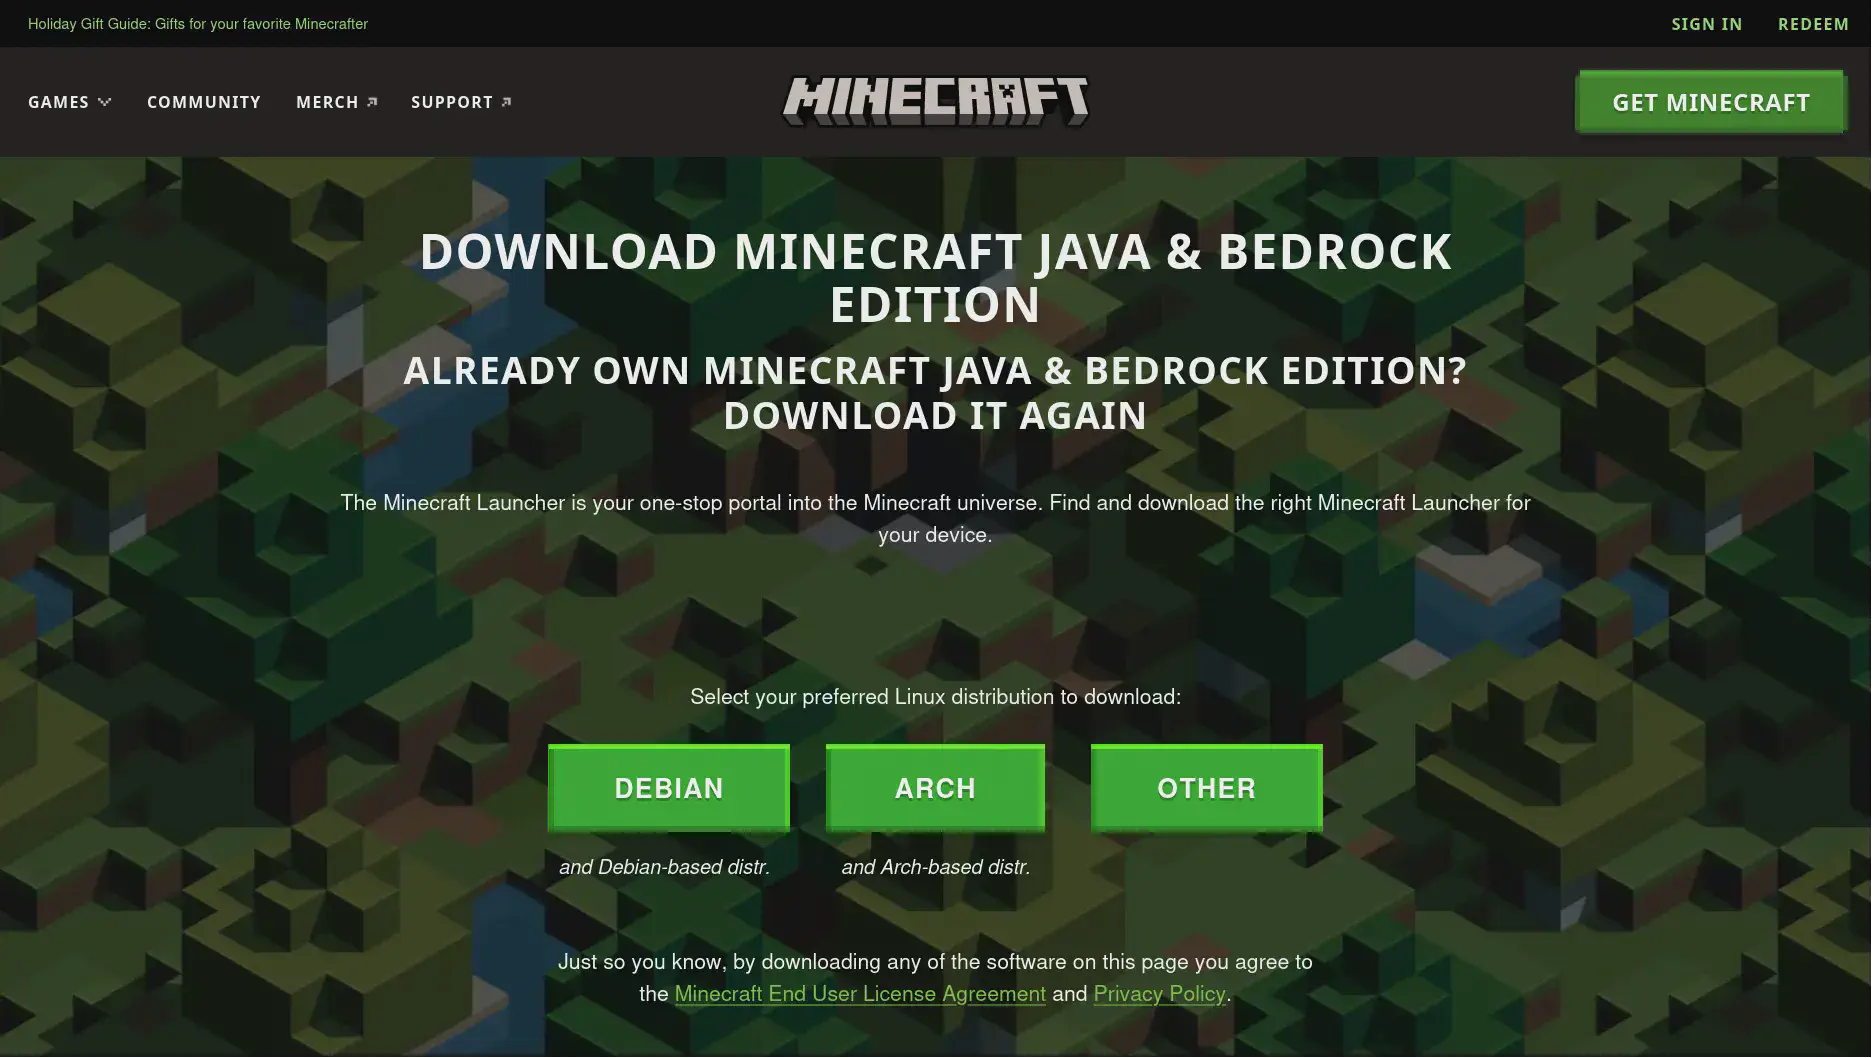 Download the Minecraft client.